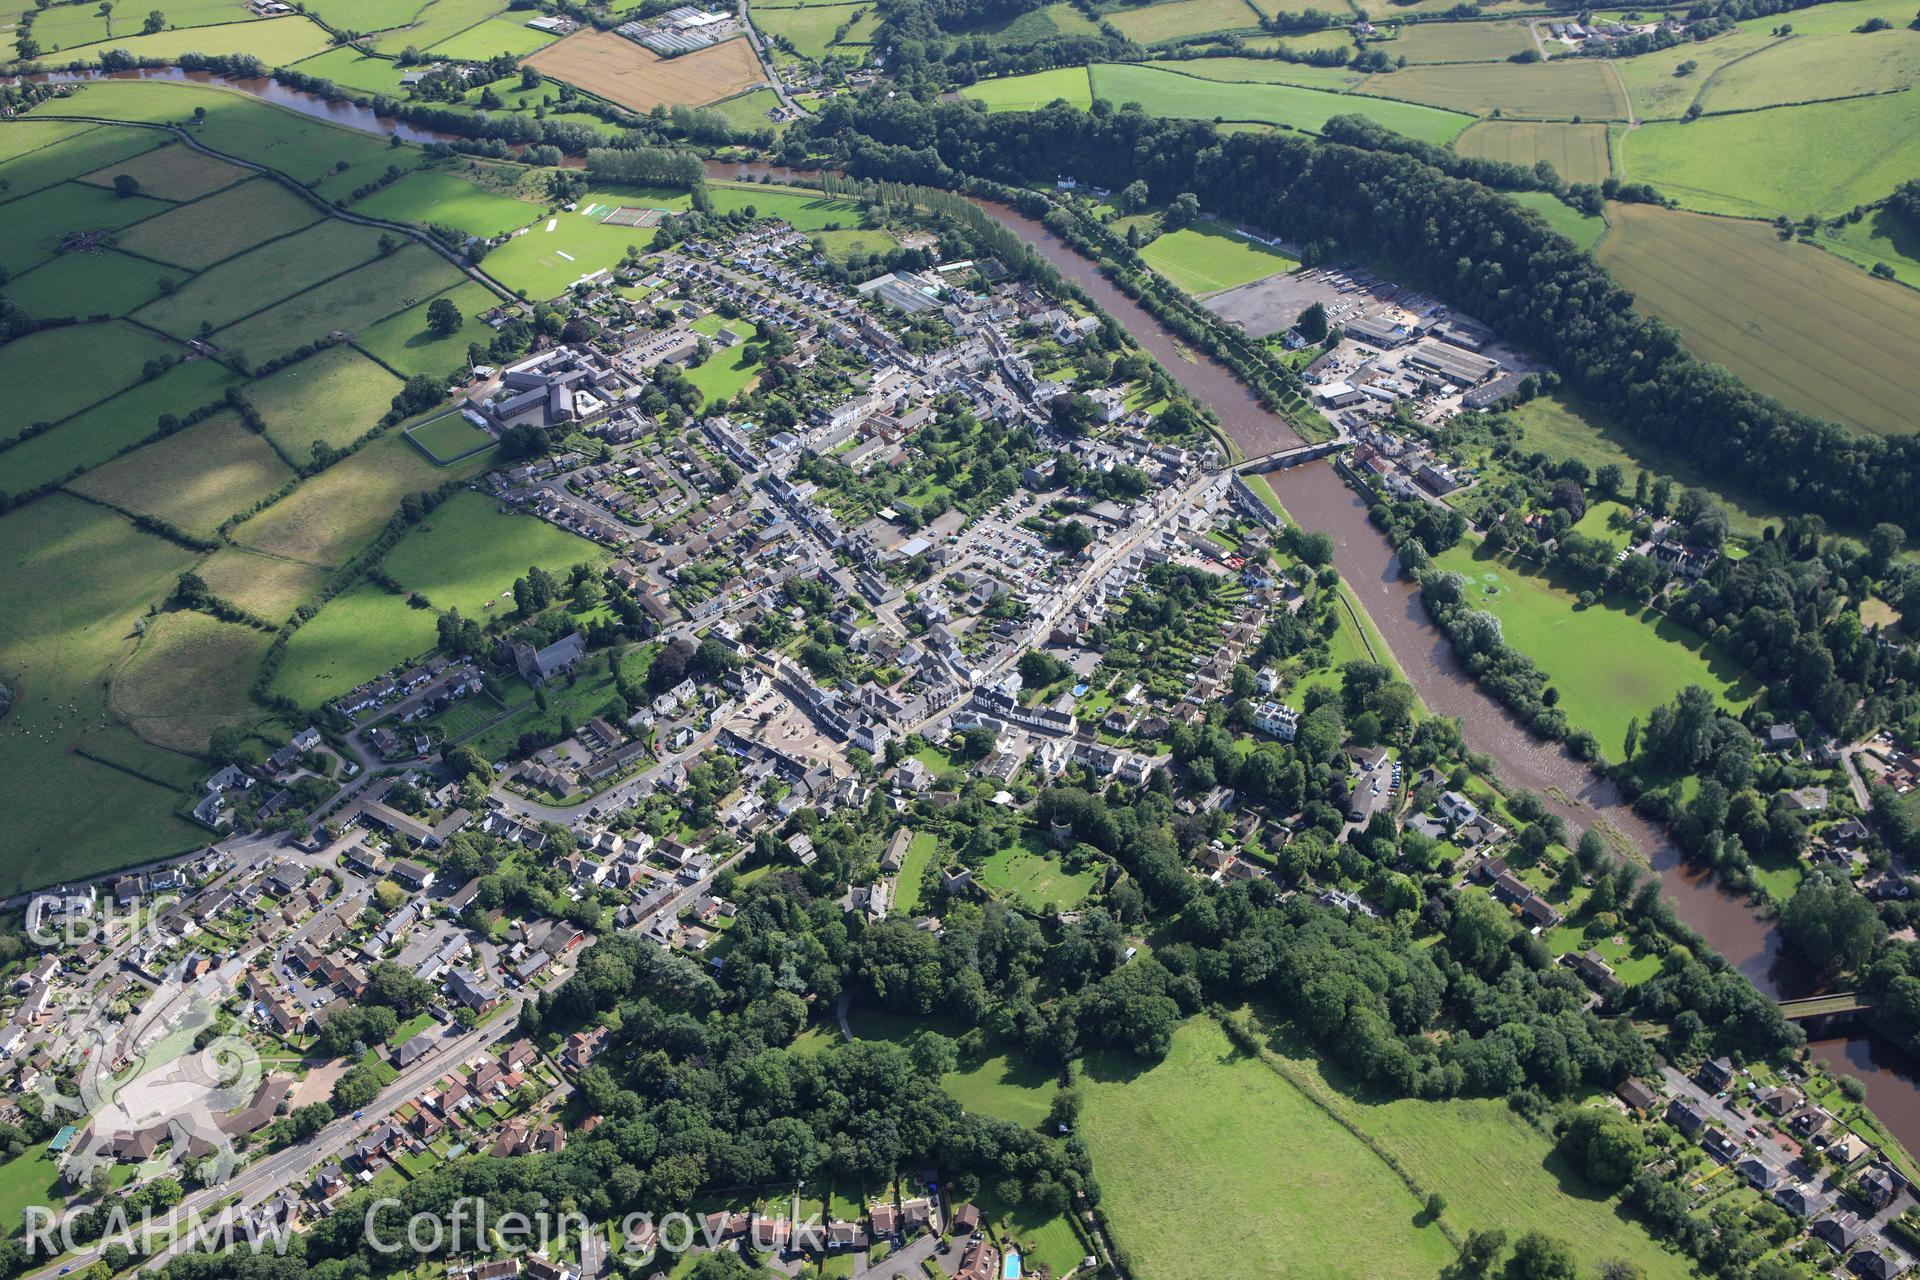 RCAHMW colour oblique aerial photograph of Usk and surrounding landscape. Taken on 23 July 2009 by Toby Driver